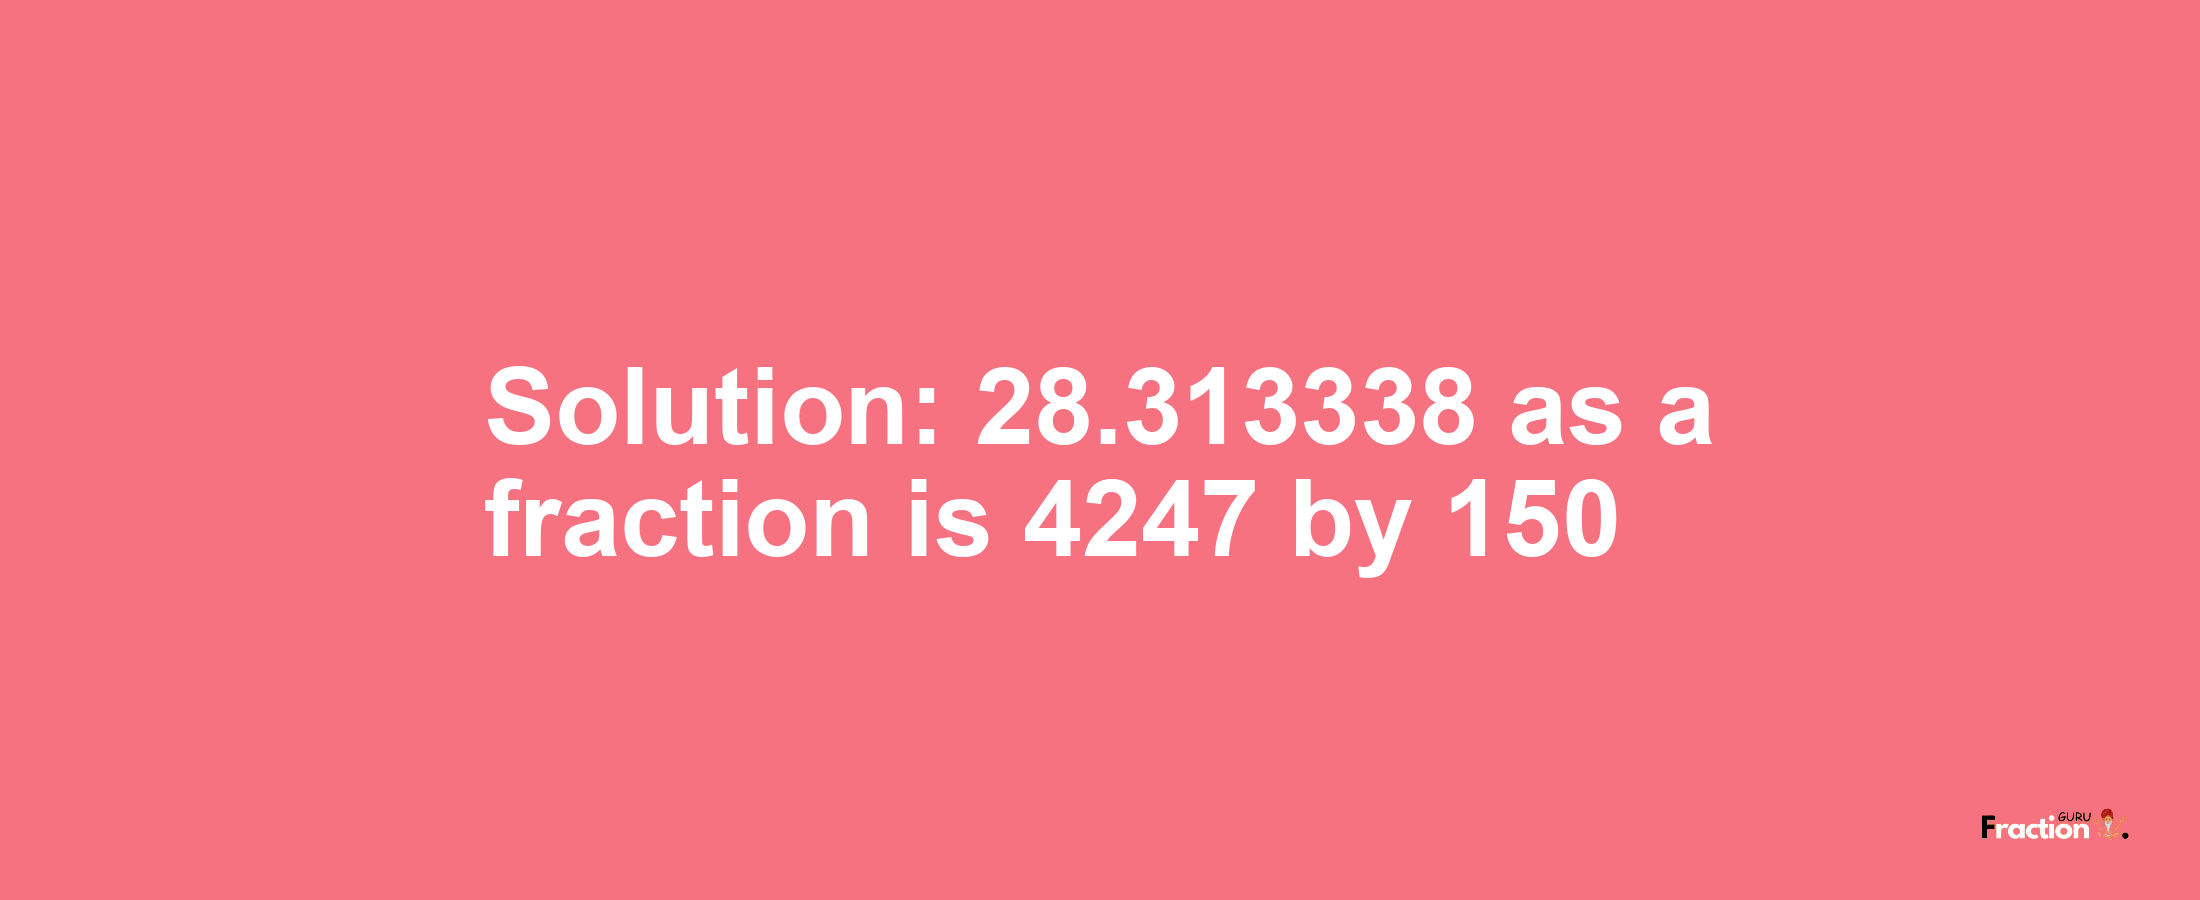 Solution:28.313338 as a fraction is 4247/150